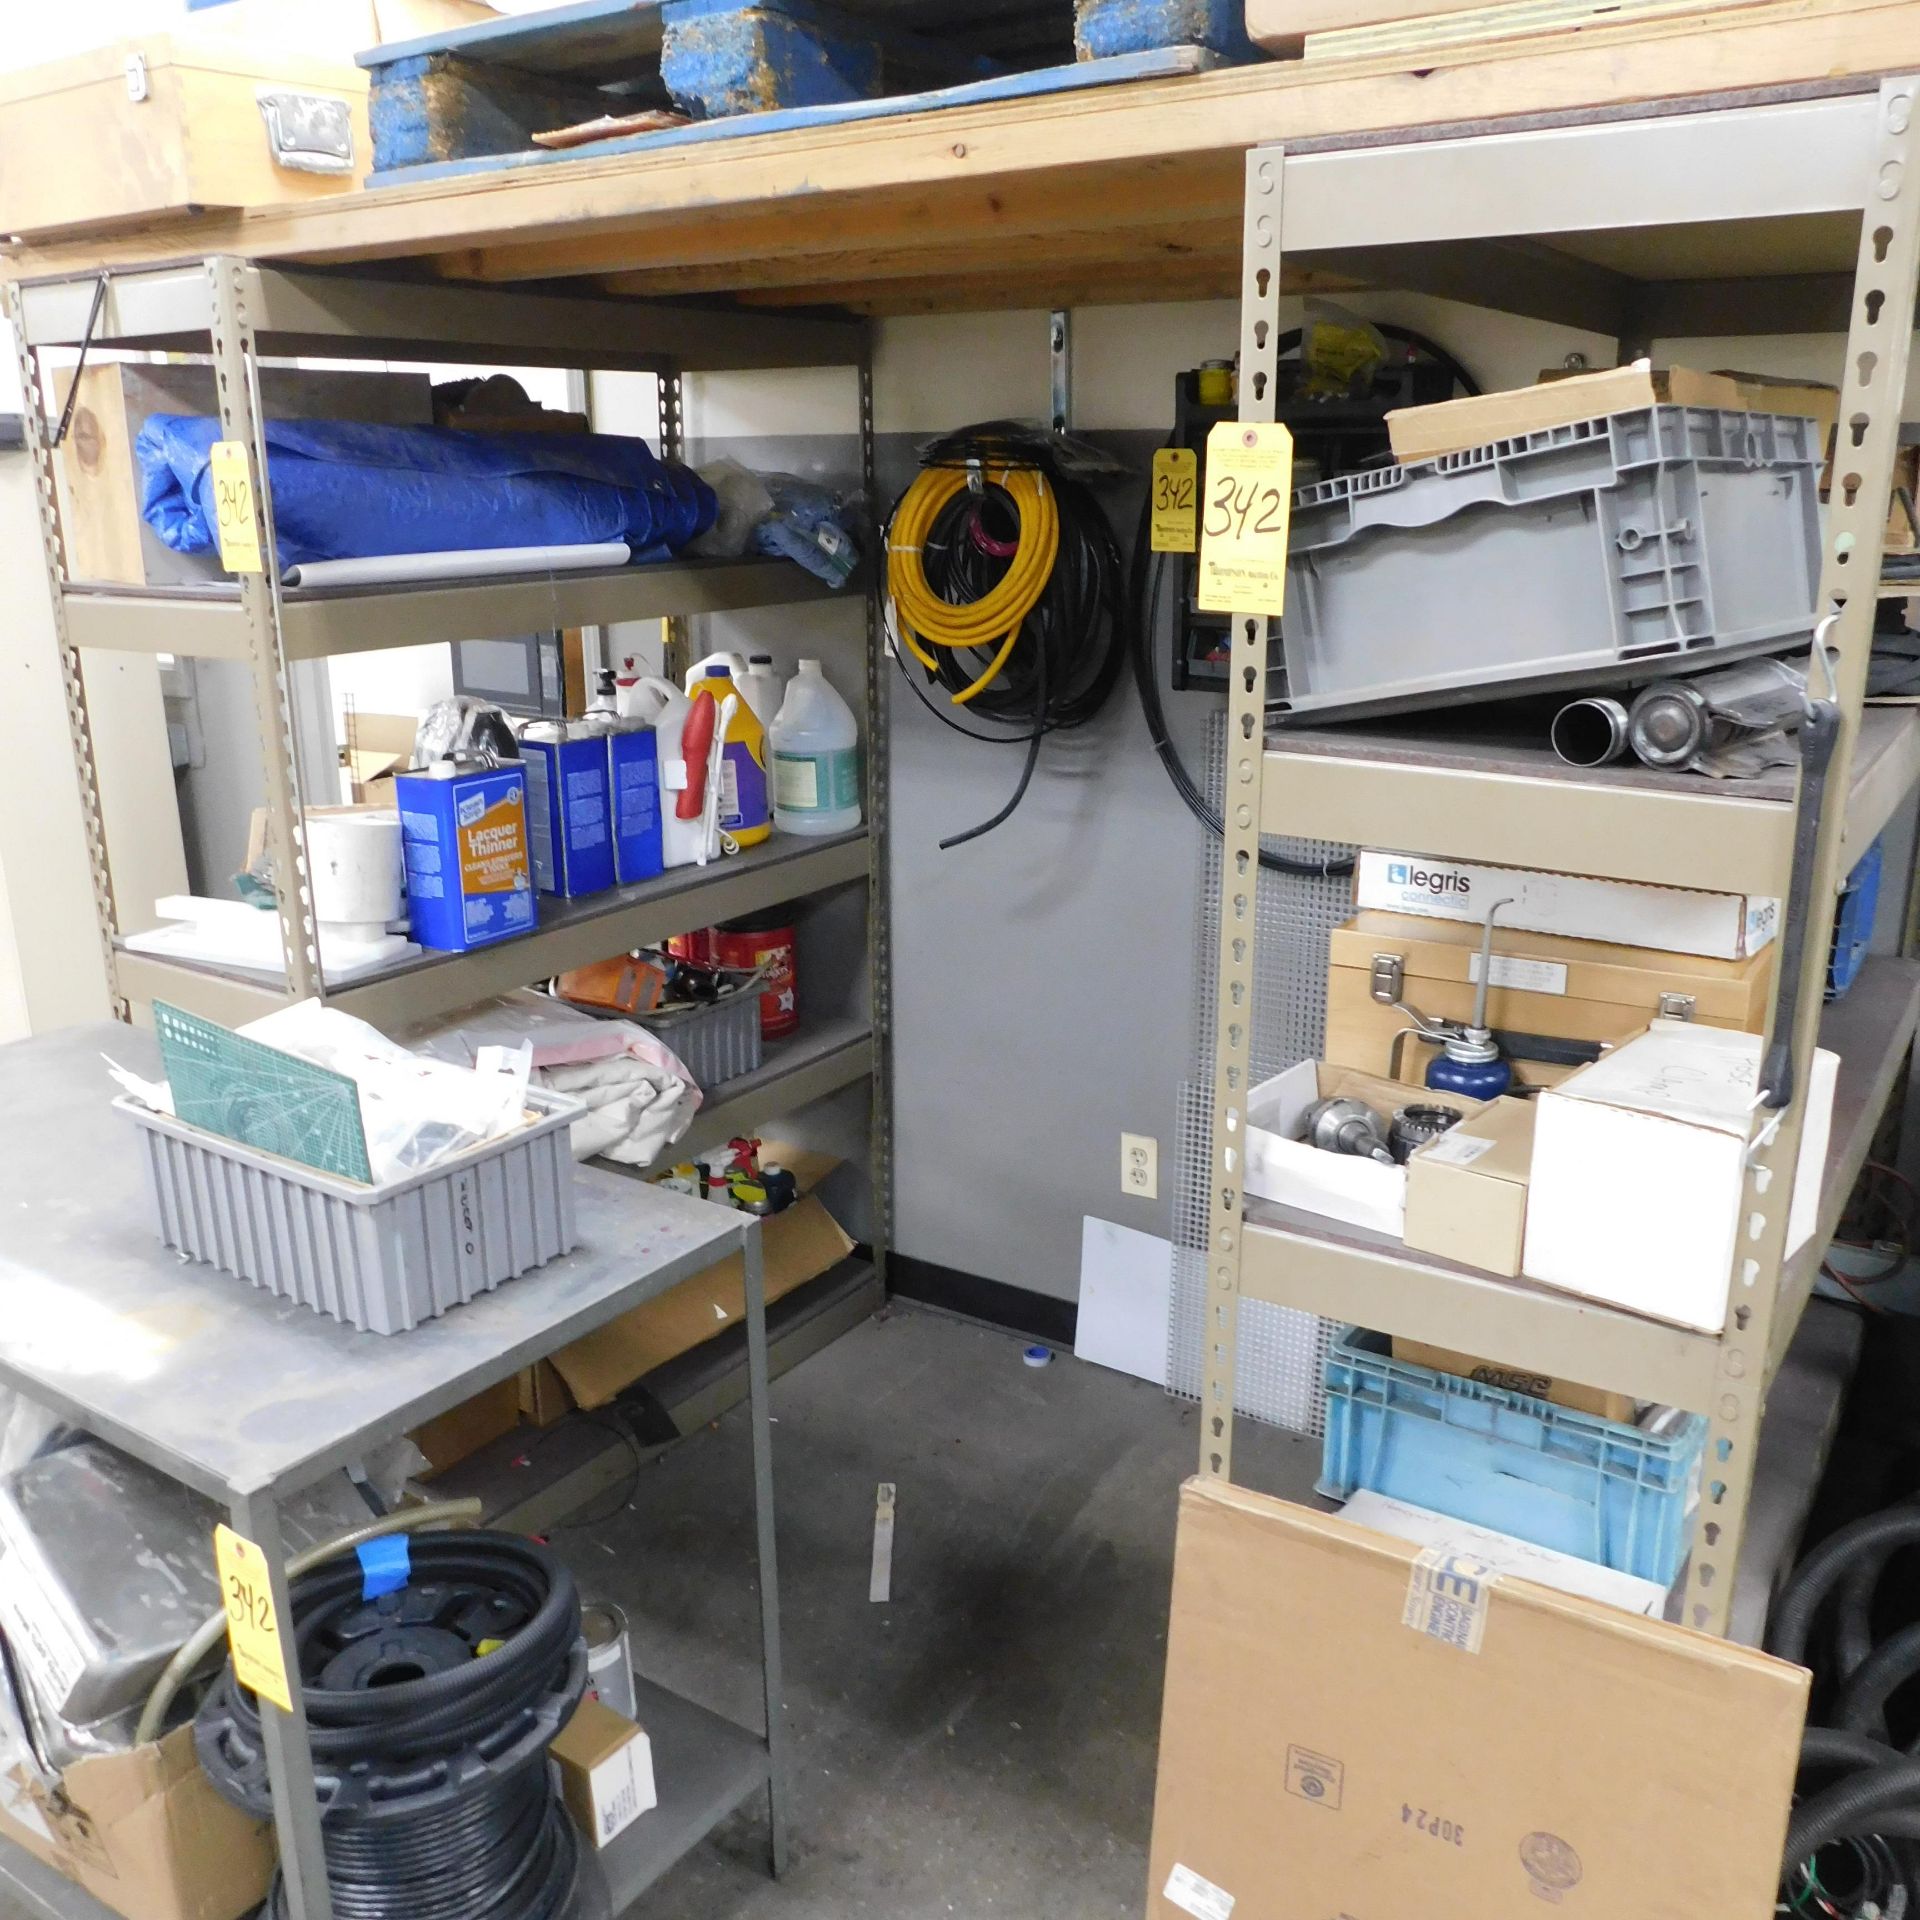 (2) Sections Metal Shelving, 48" X 72" X 18 1/2" Deep, with All Contents of Maintenance Items, etc.